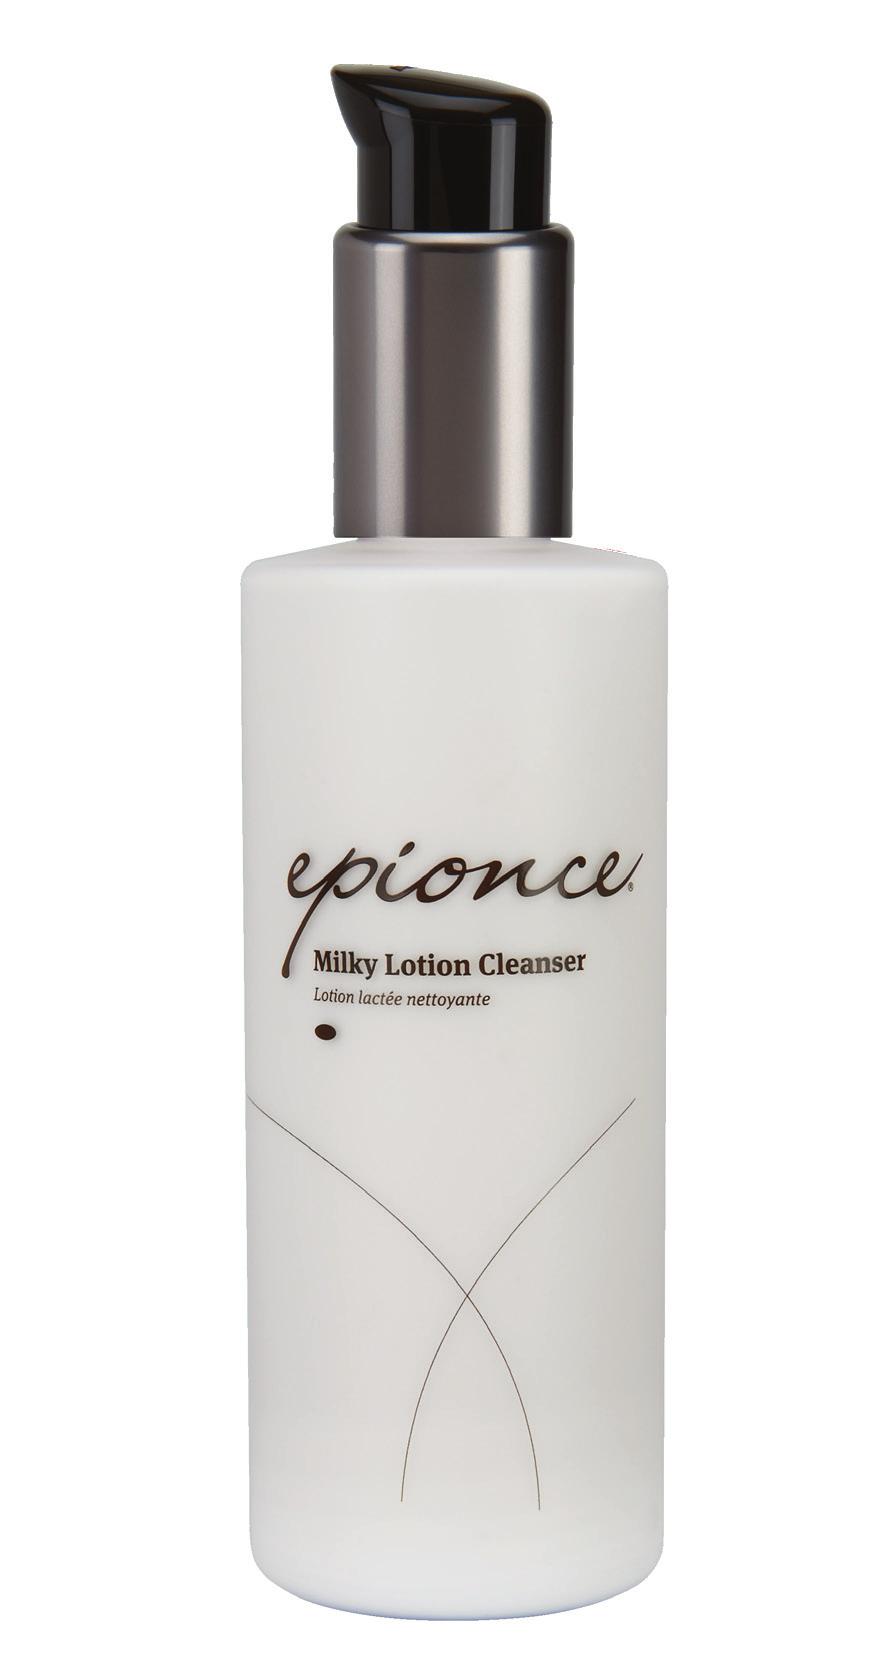 Epionce Products: Cleanse & Prepare Milky Lotion Cleanser The perfect daily cleanser for fragile and sensitive skin Skin Type: Dry/Sensitive Skin Ingredient Technology: AI Retail Size: 6.